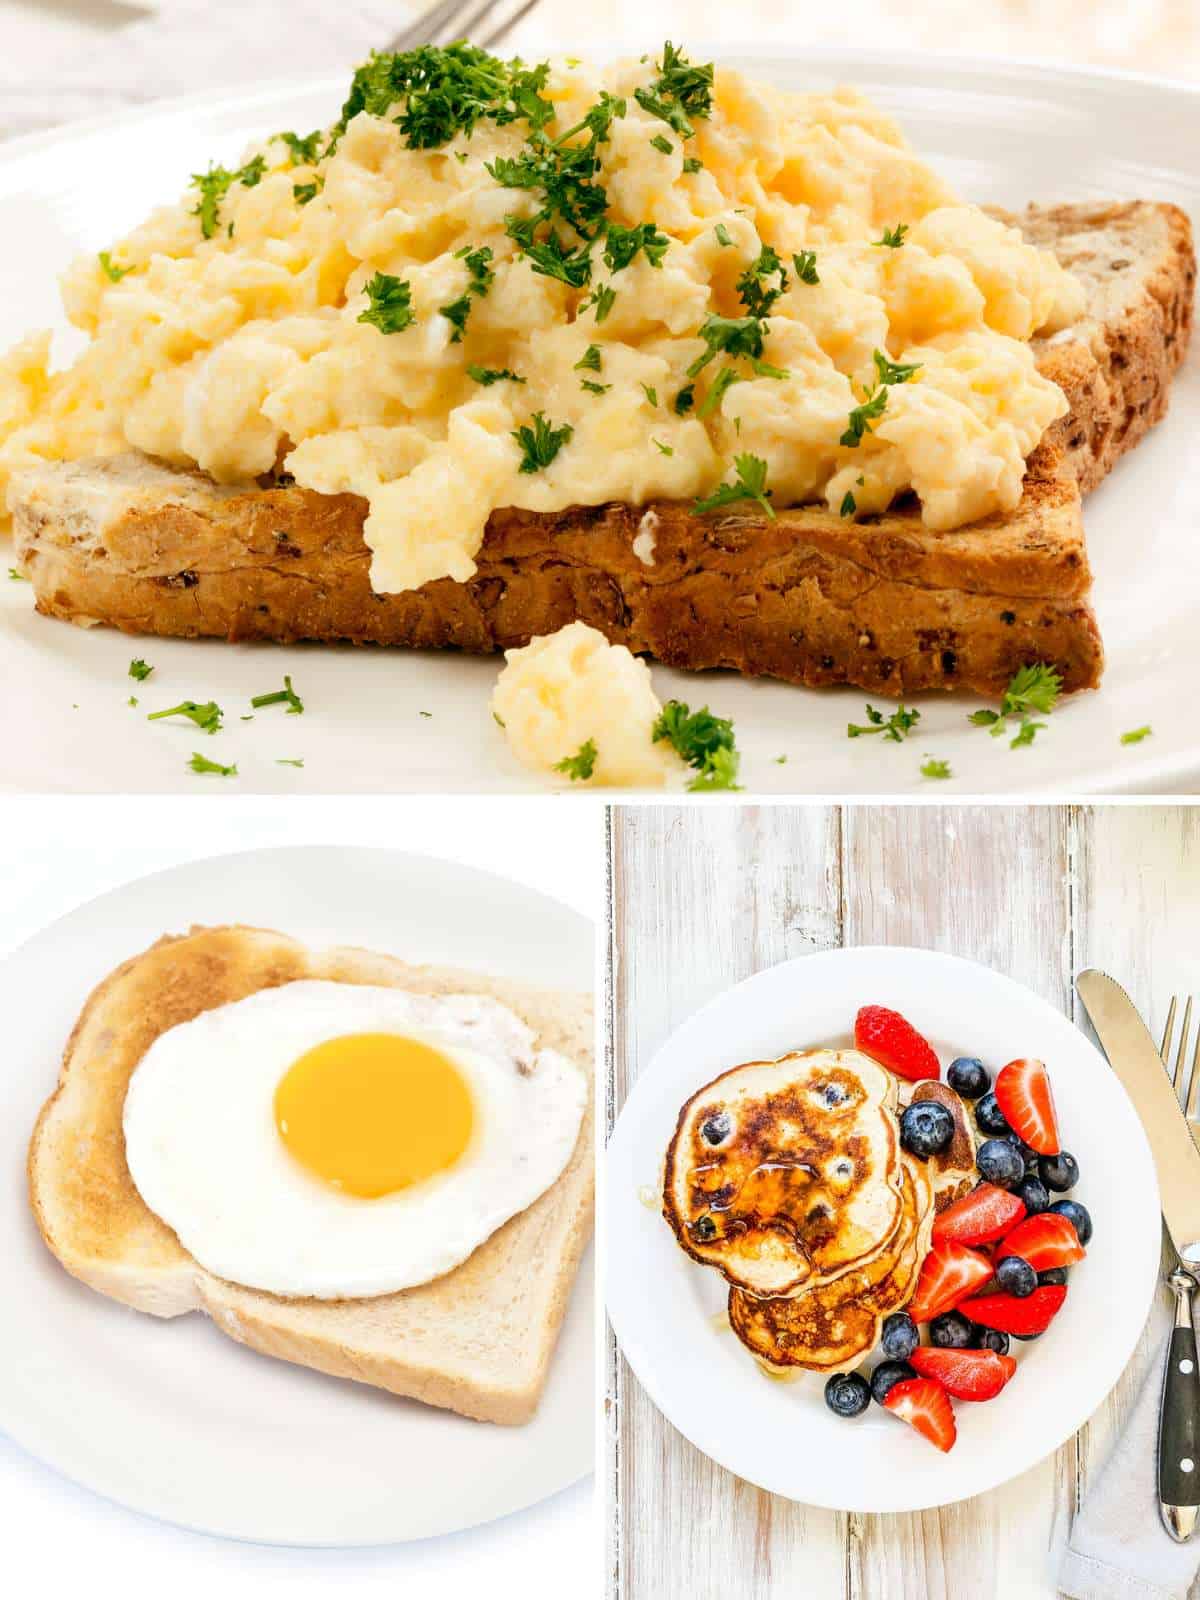 Pictures of scrambled eggs on toast, fried egg on toast and pancakes with fruits.